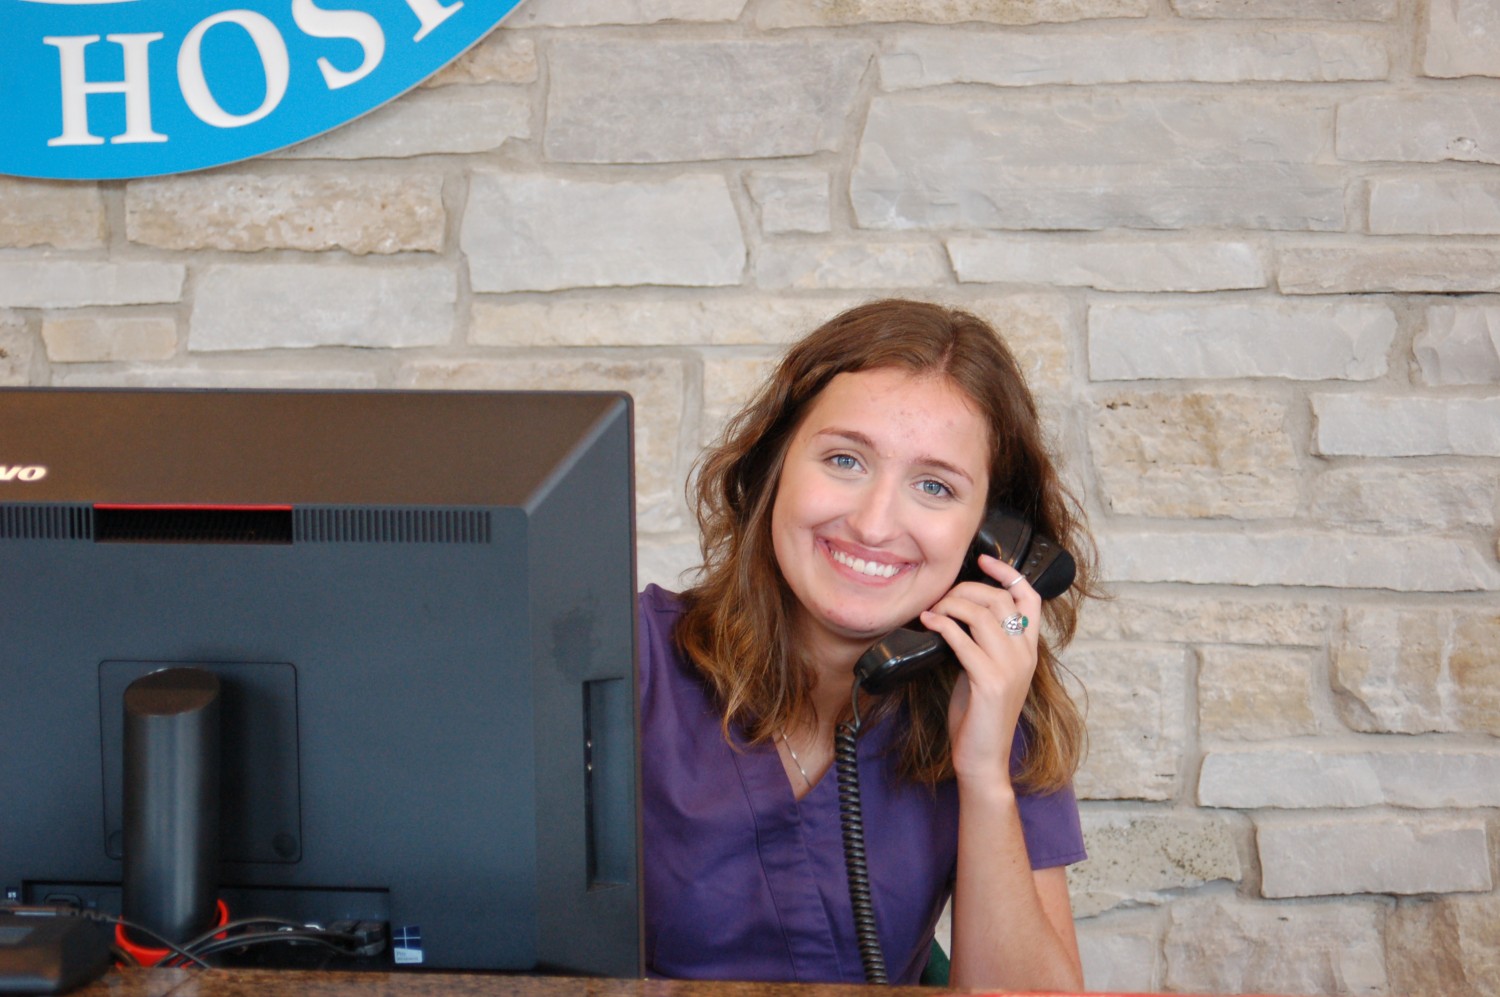 Receptionist with phone - Call us any time!